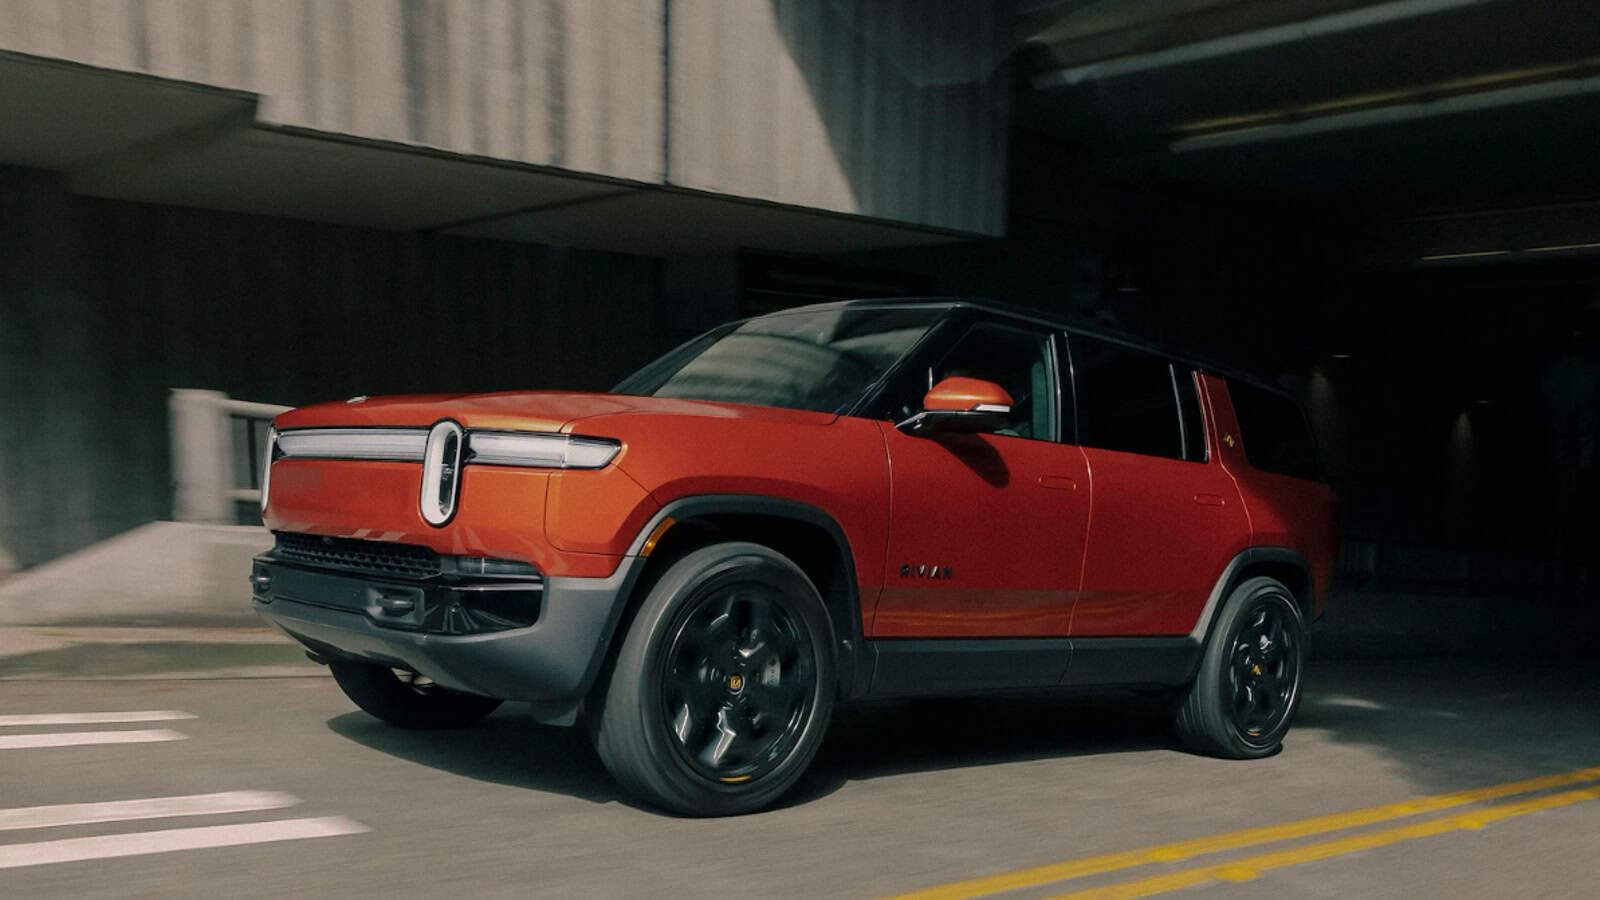 Rivian Tri Max R1S electric SUV in Red Canyon with Darkout accents and 22 inch Sport Wheels.